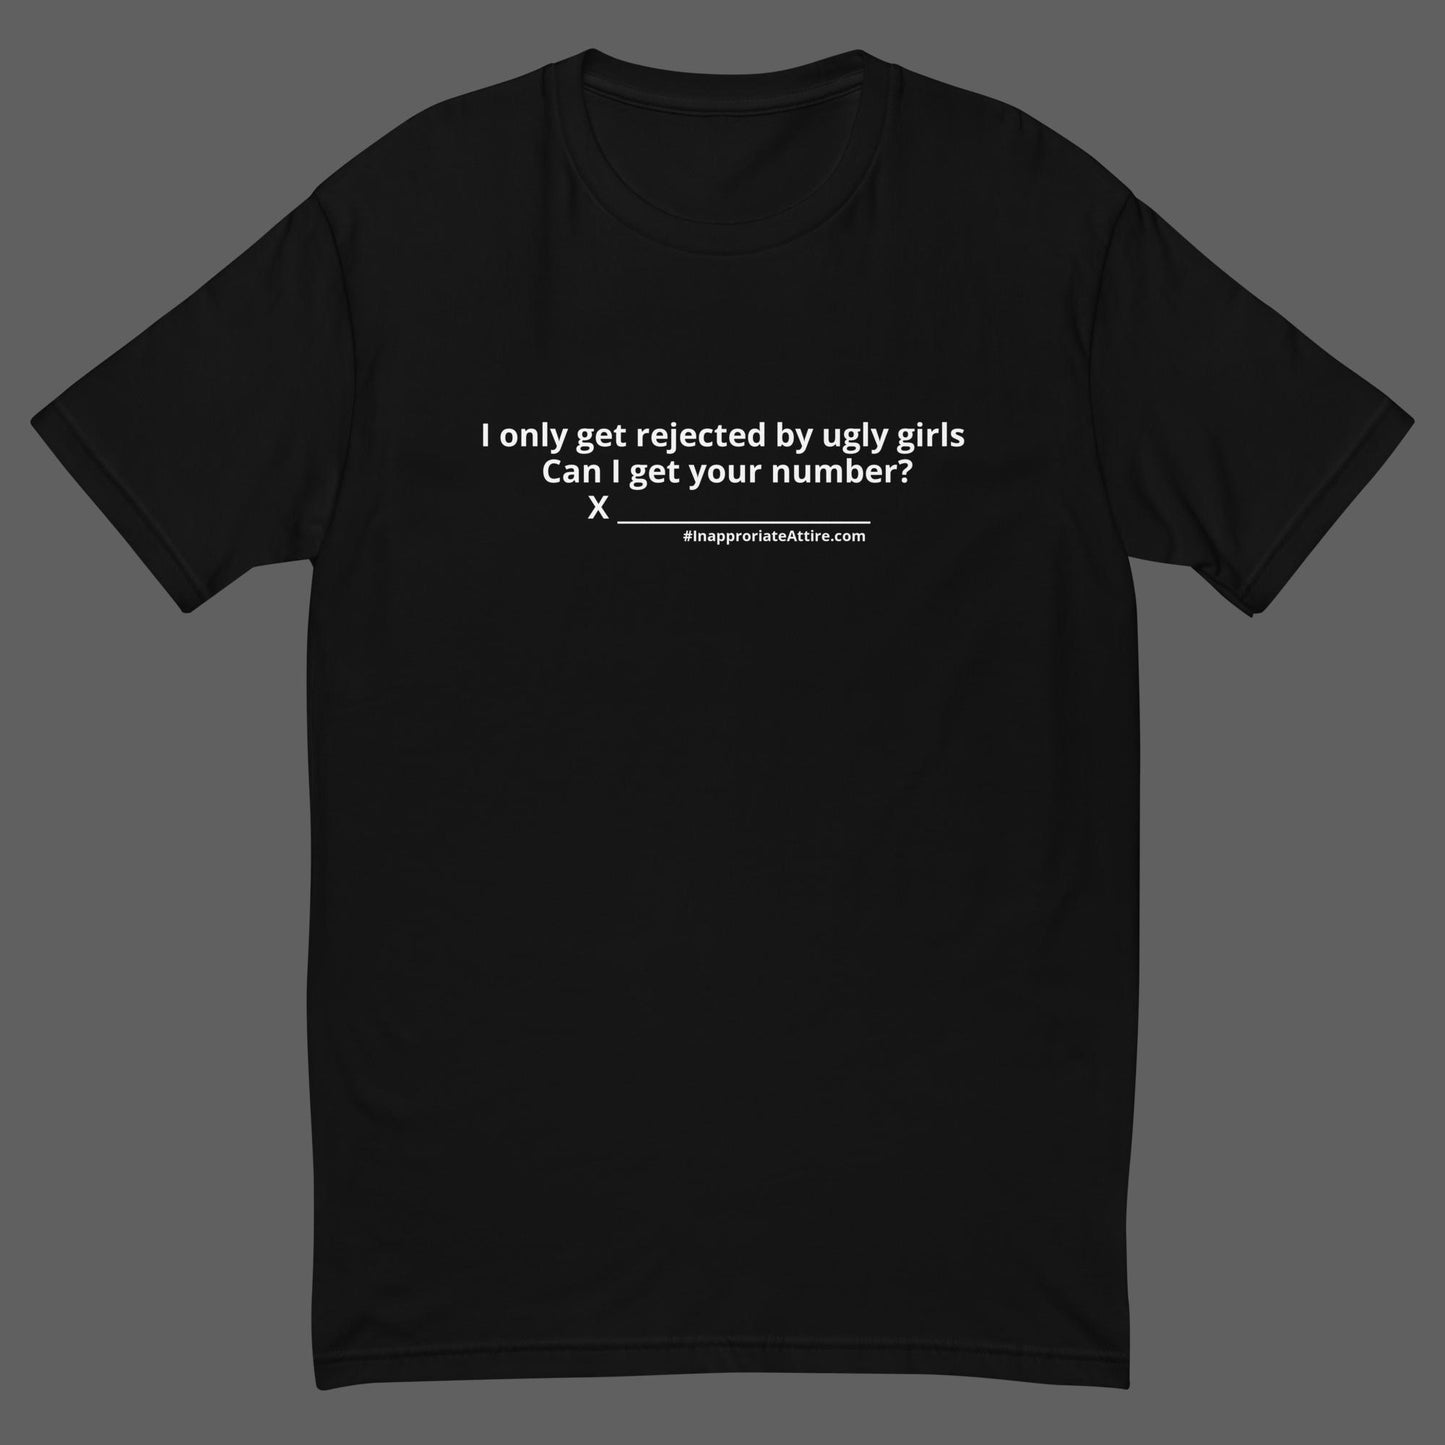 Rejected T-shirt